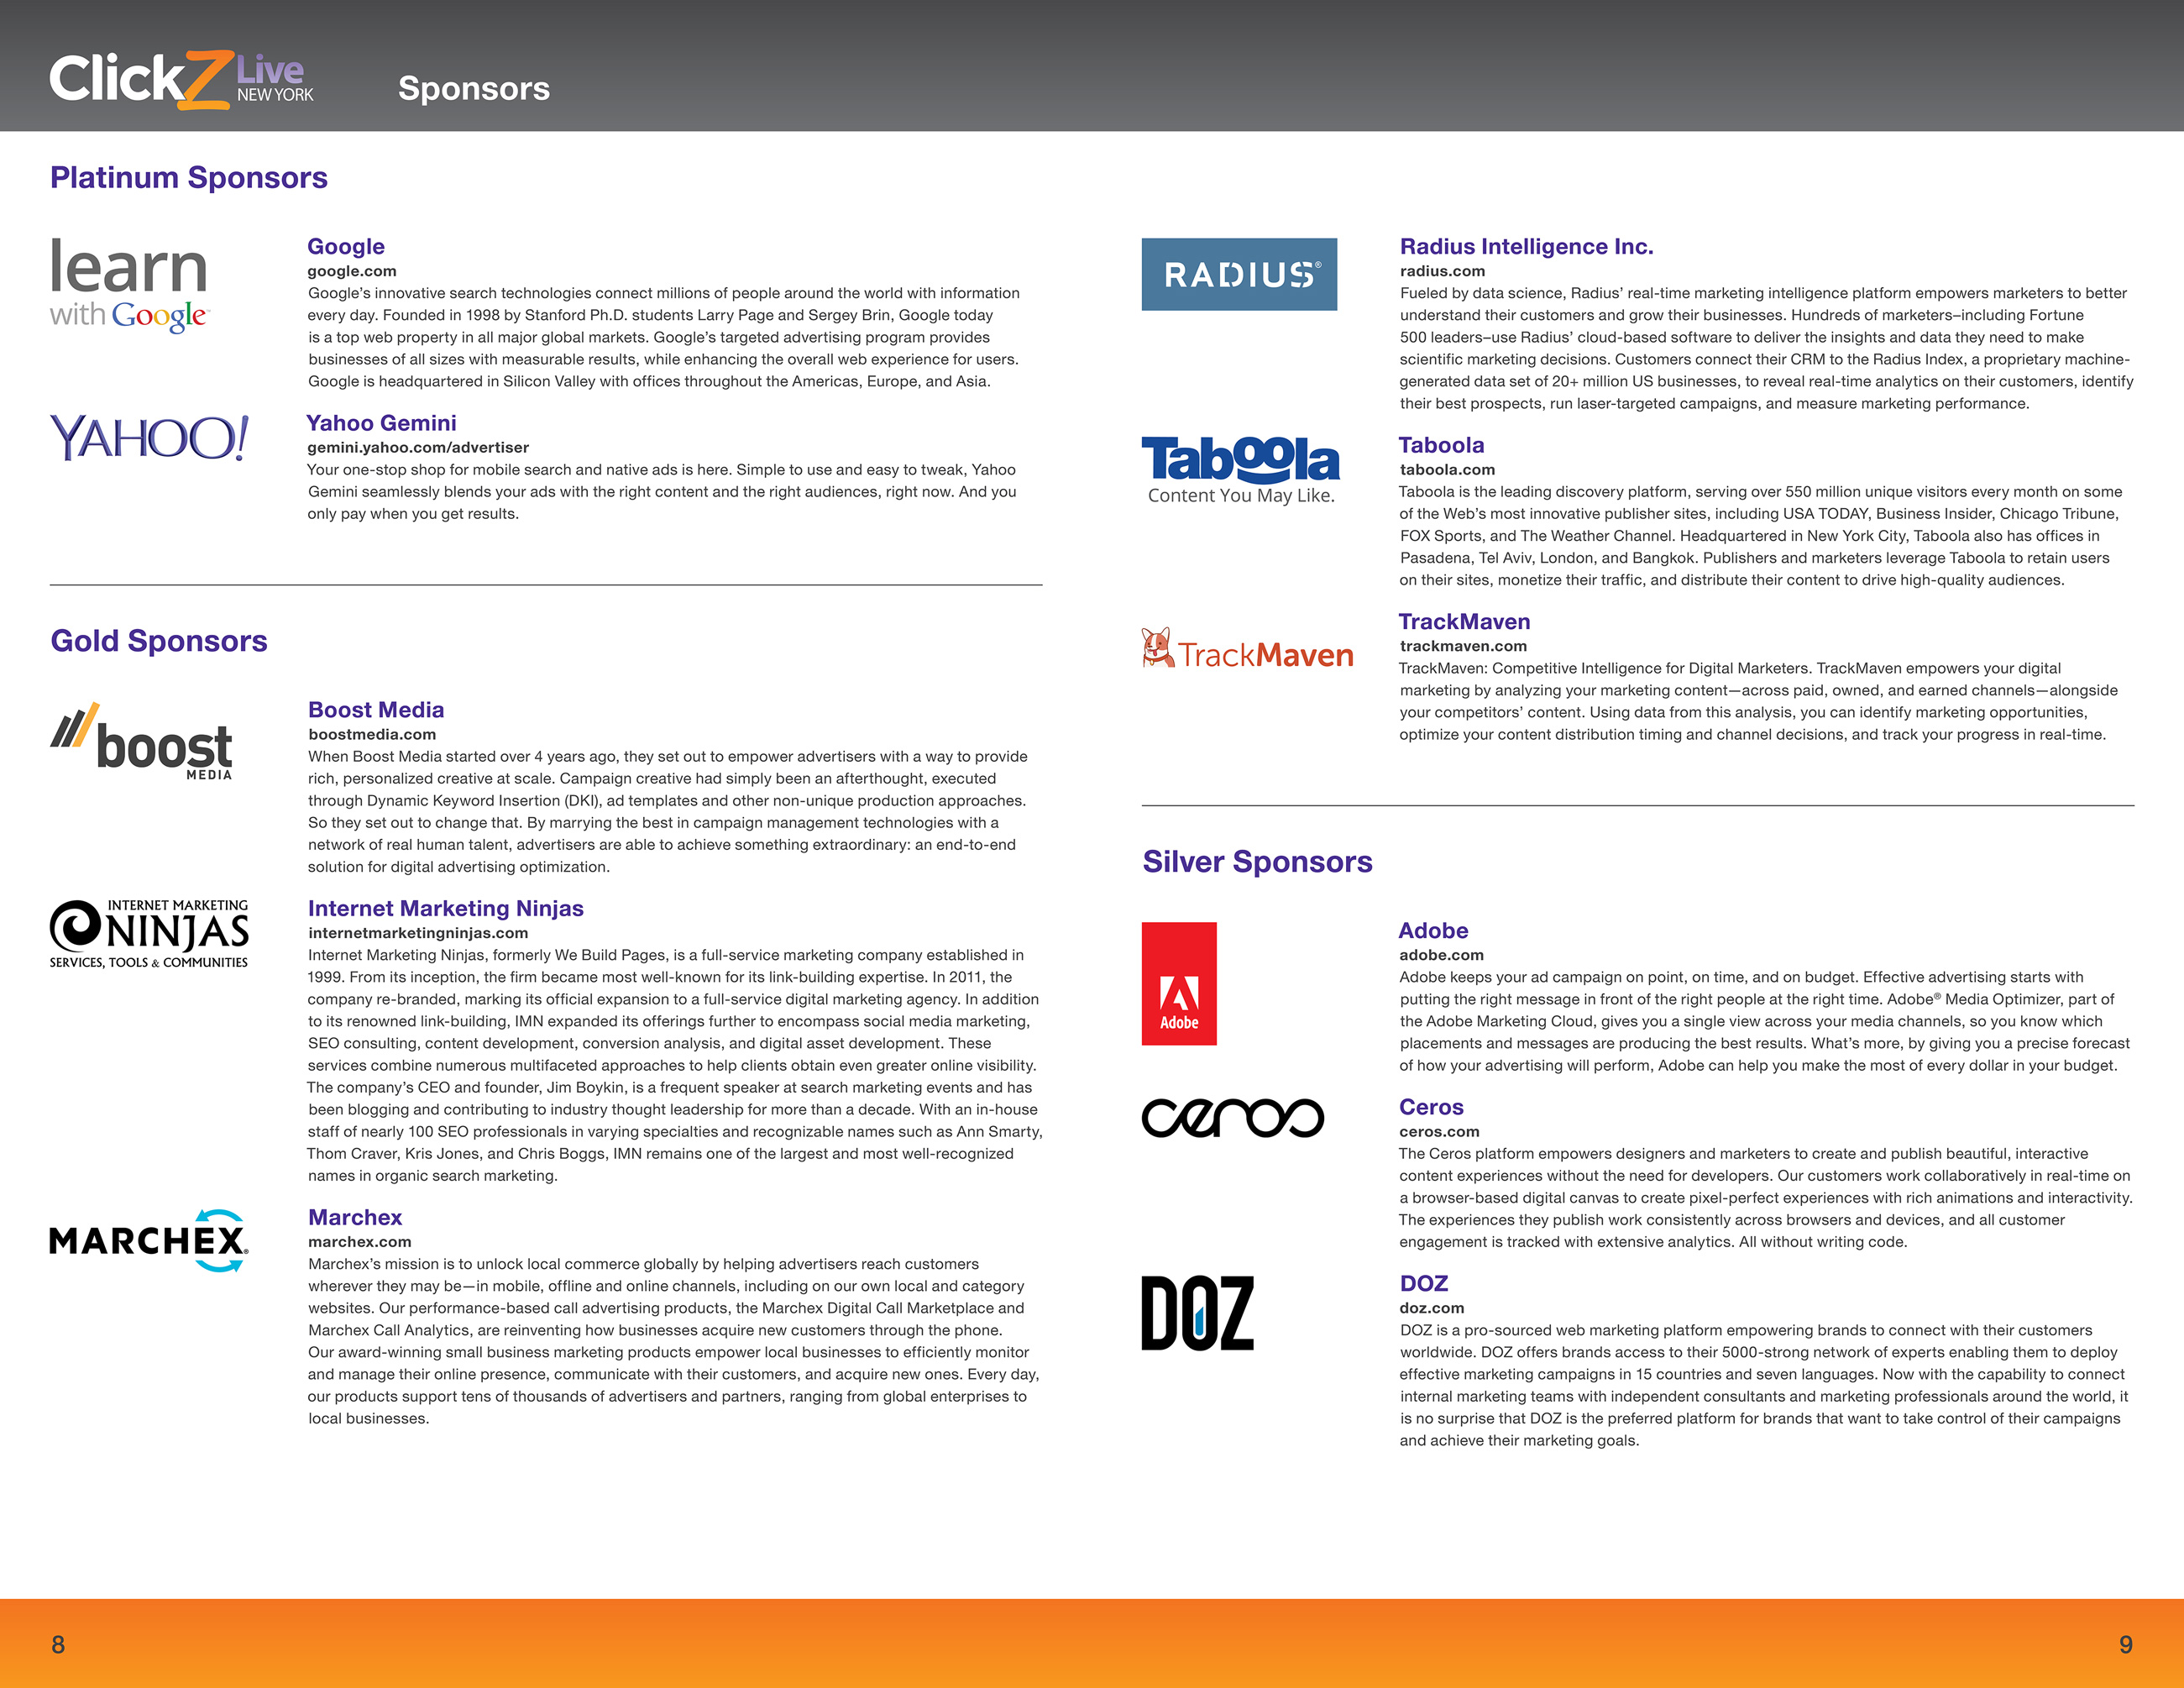 Spread from the conference guide for ClickZ Live New York. Shows descriptions and logos of the platinum, gold, and silver sponsors. Platinum sponsors are Google and Yahoo.